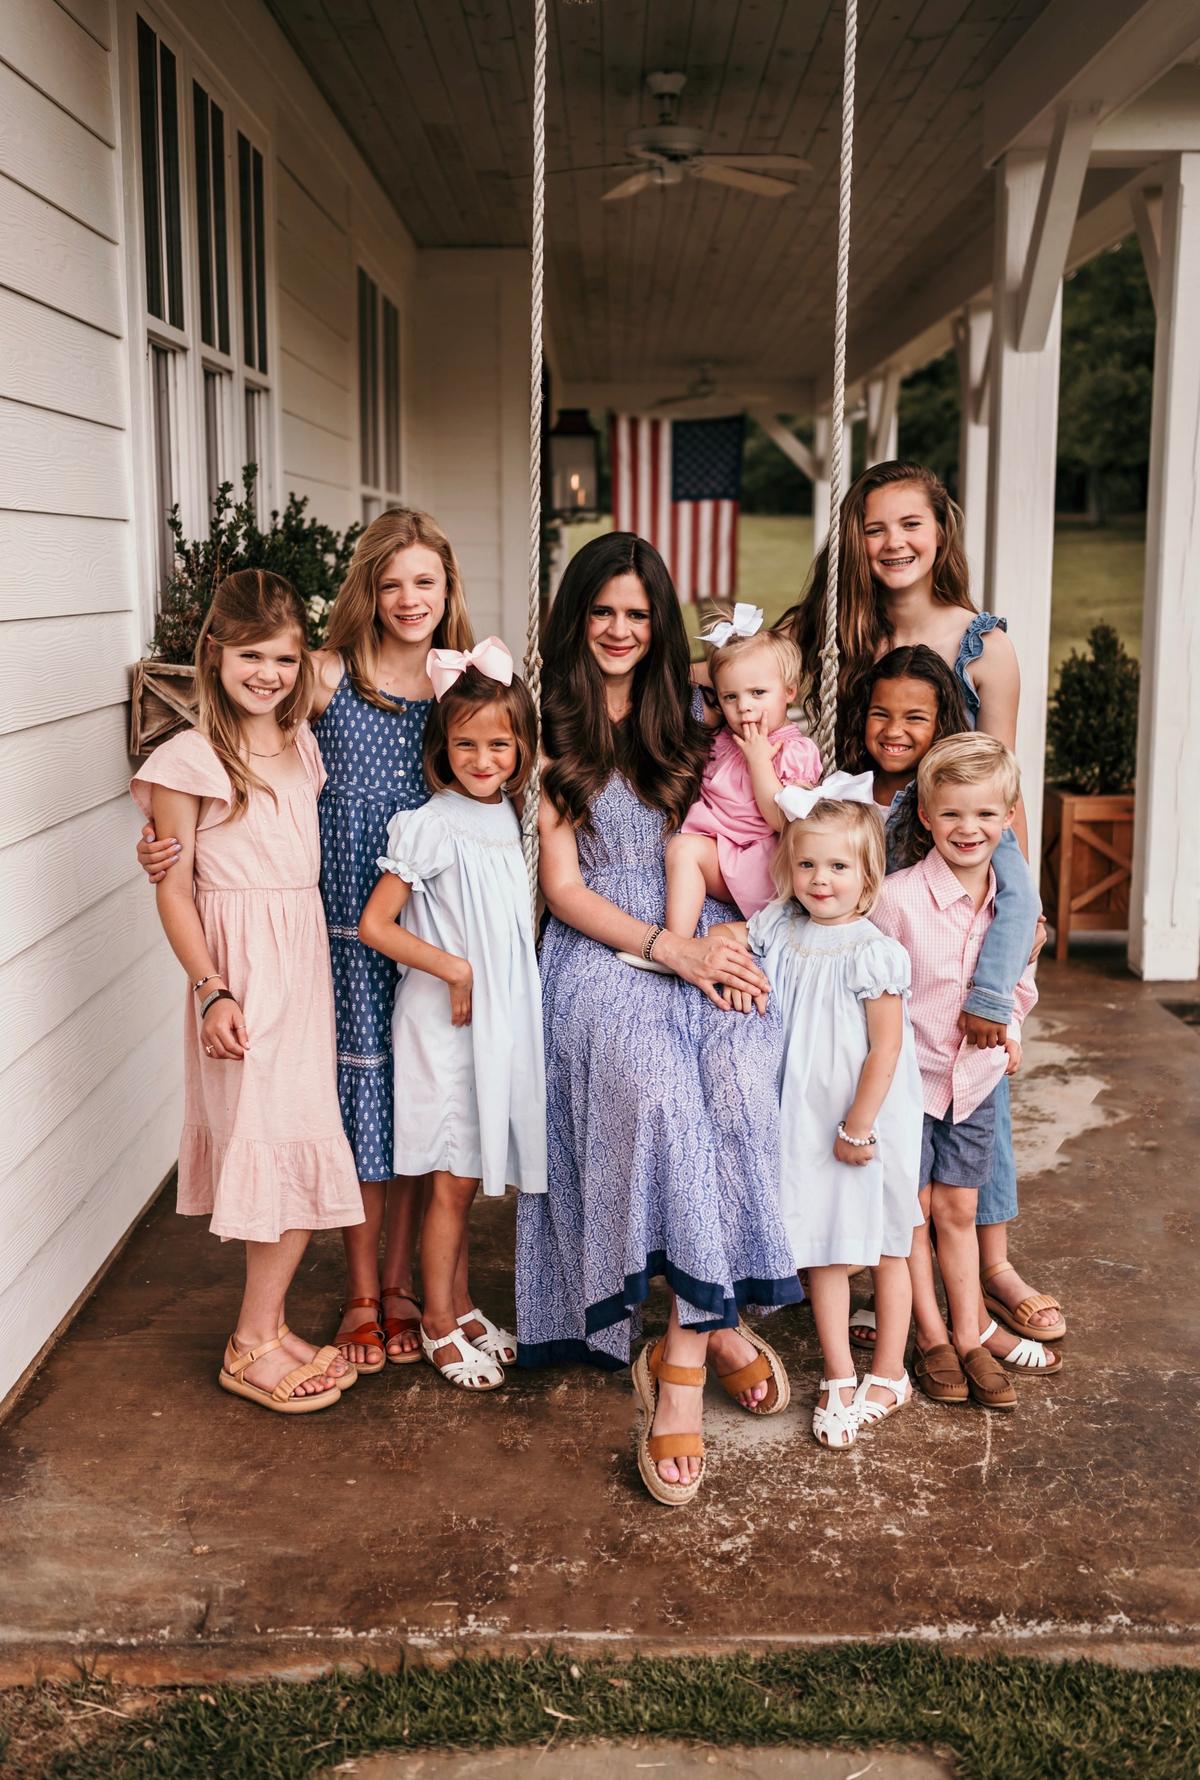 The mom of 8 says looking after her family and helping raise her kids is "the most empowering thing" she's ever done. (Courtesy of <a href="https://www.instagram.com/kelliingram/">Kelli Ingram</a>)